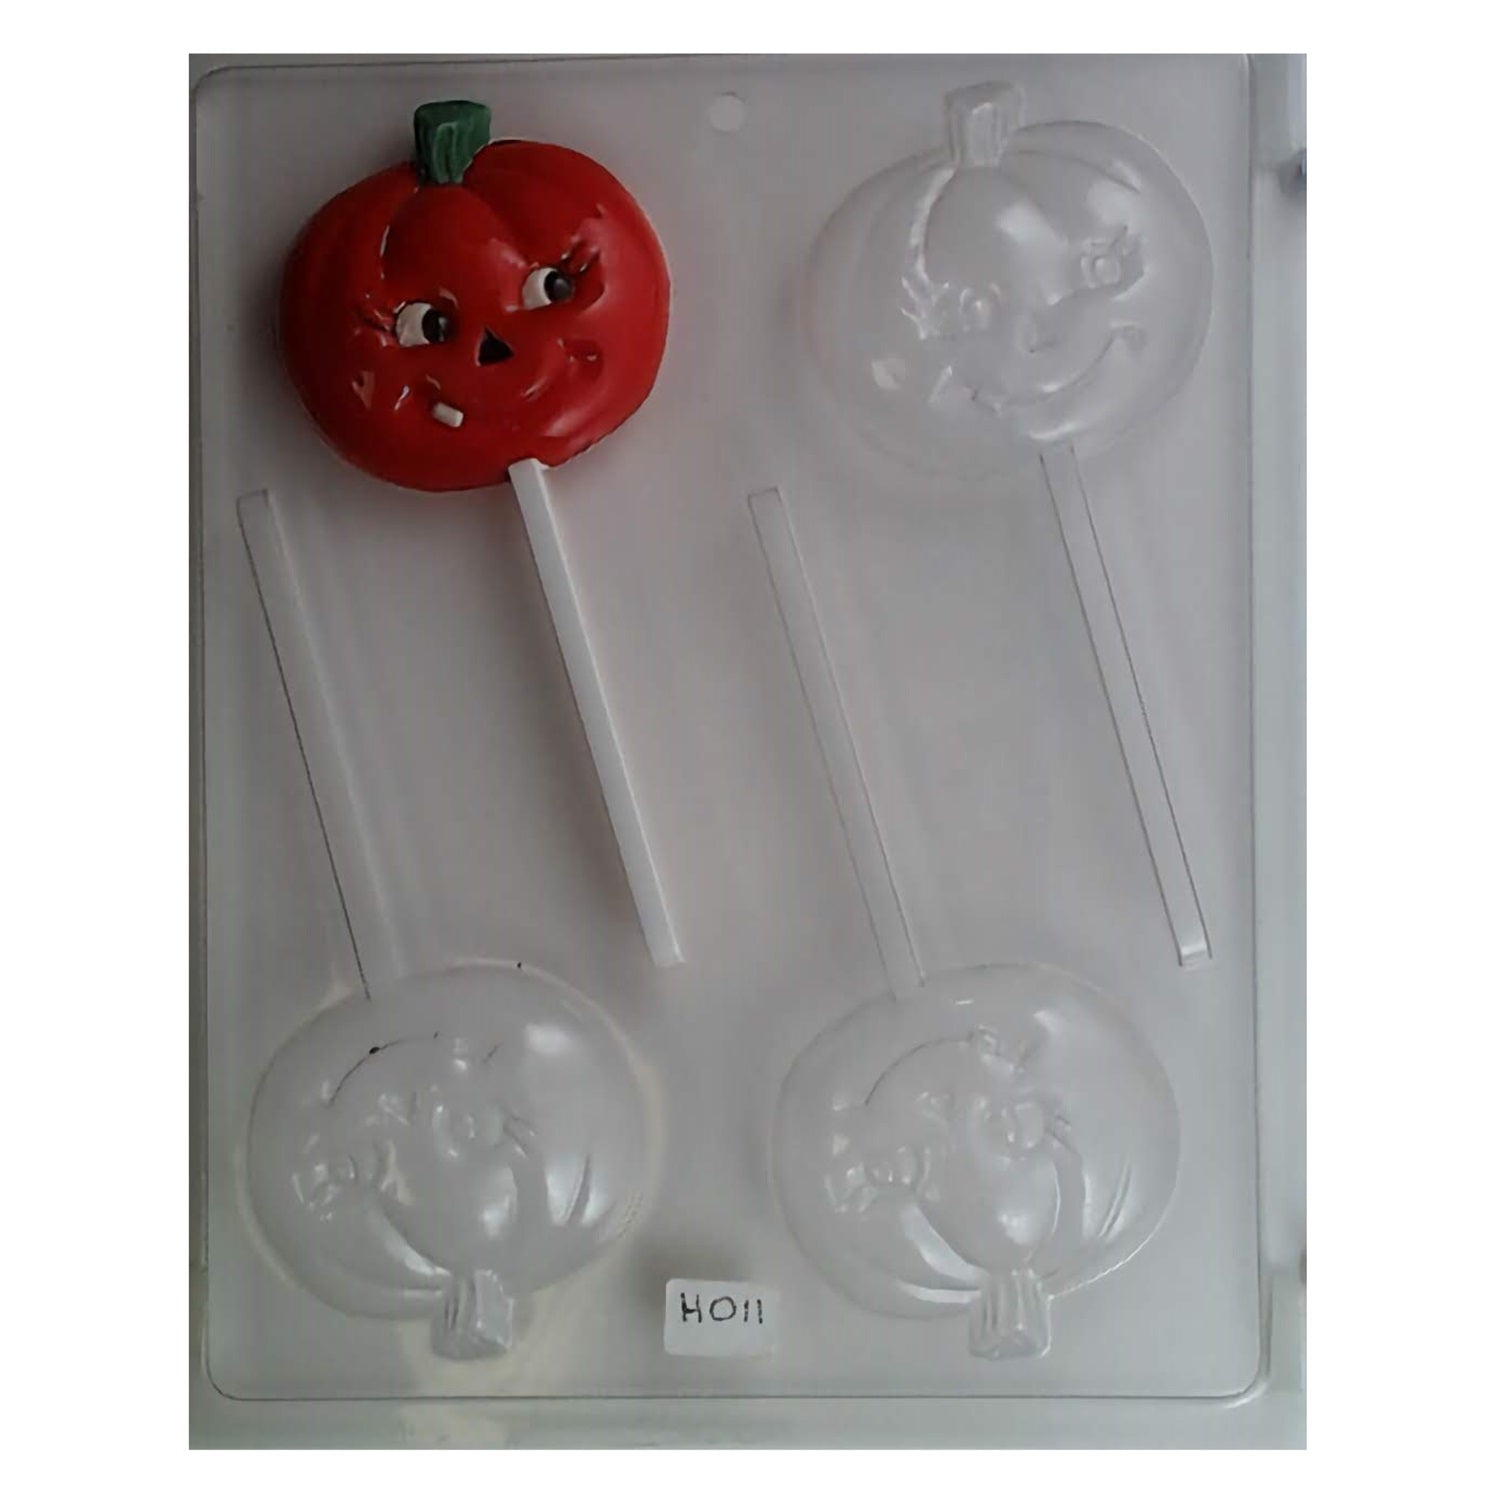 Seasonal lollipop chocolate mold featuring a smiling pumpkin face, perfect for creating Halloween candy suckers.